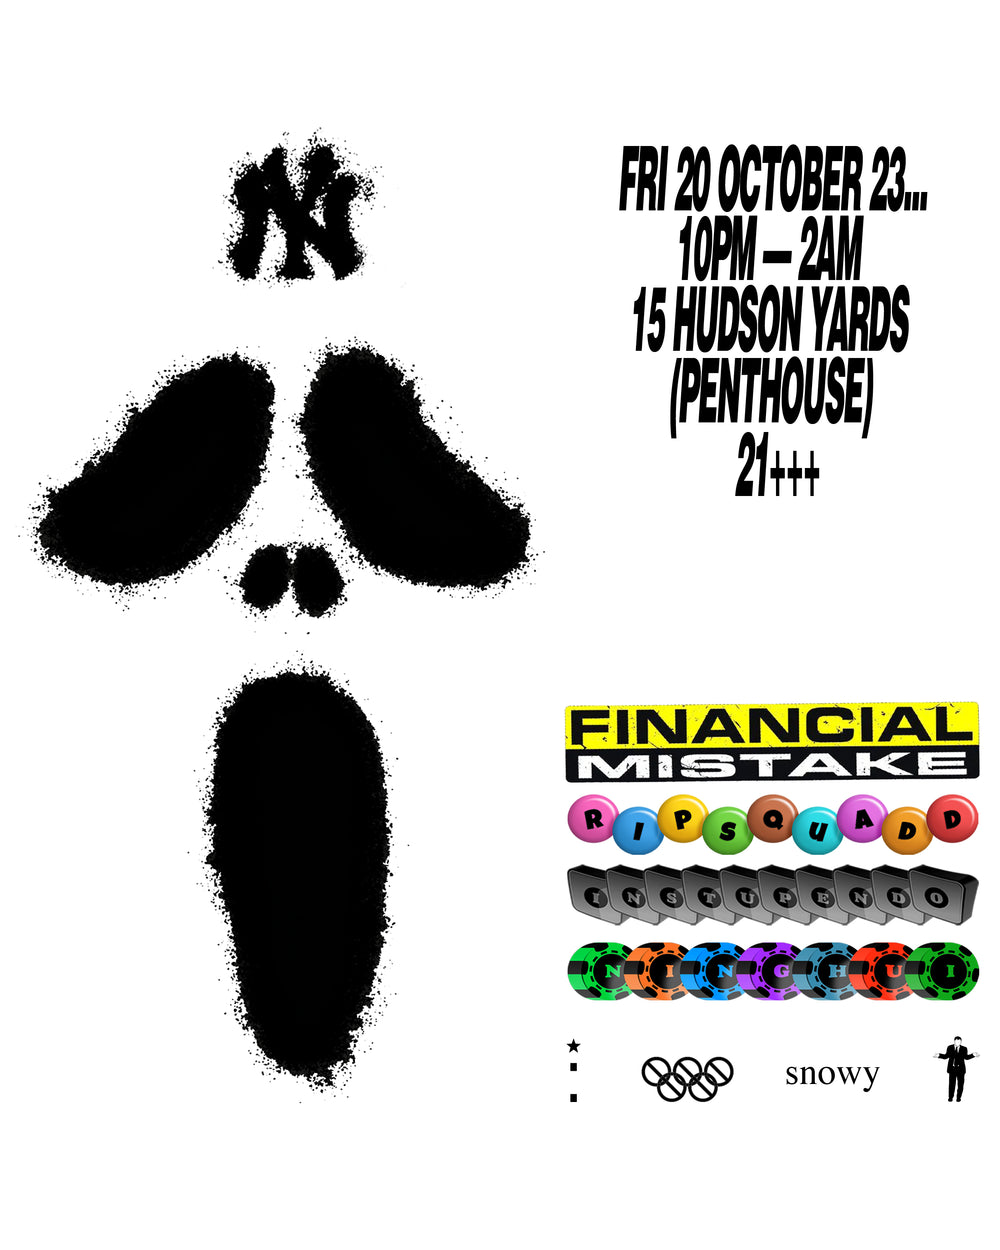 FINANCIAL MISTAKE OCT 20TH